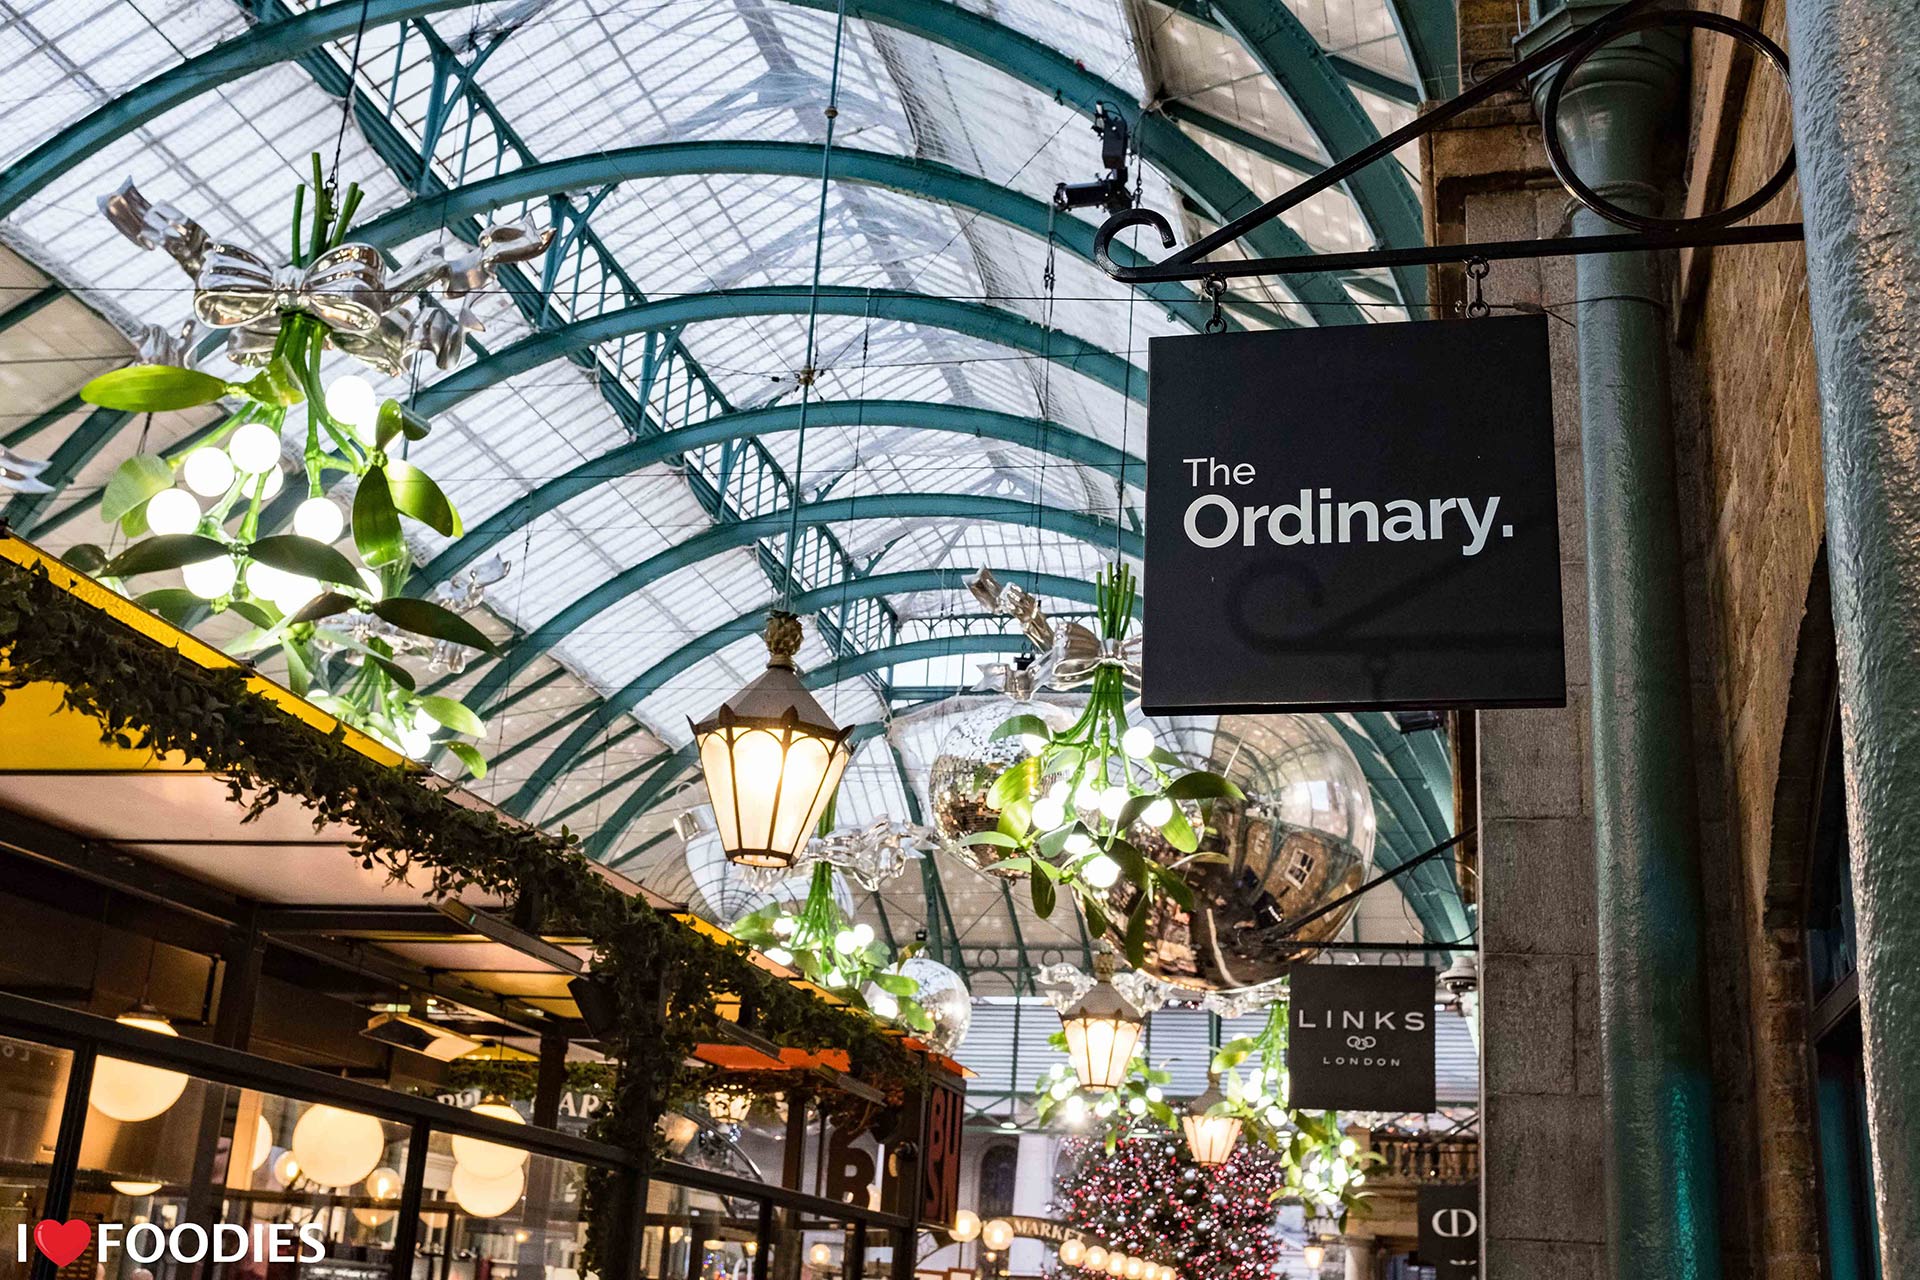 The London Chronicles: Girls’ Day Out In Covent Garden